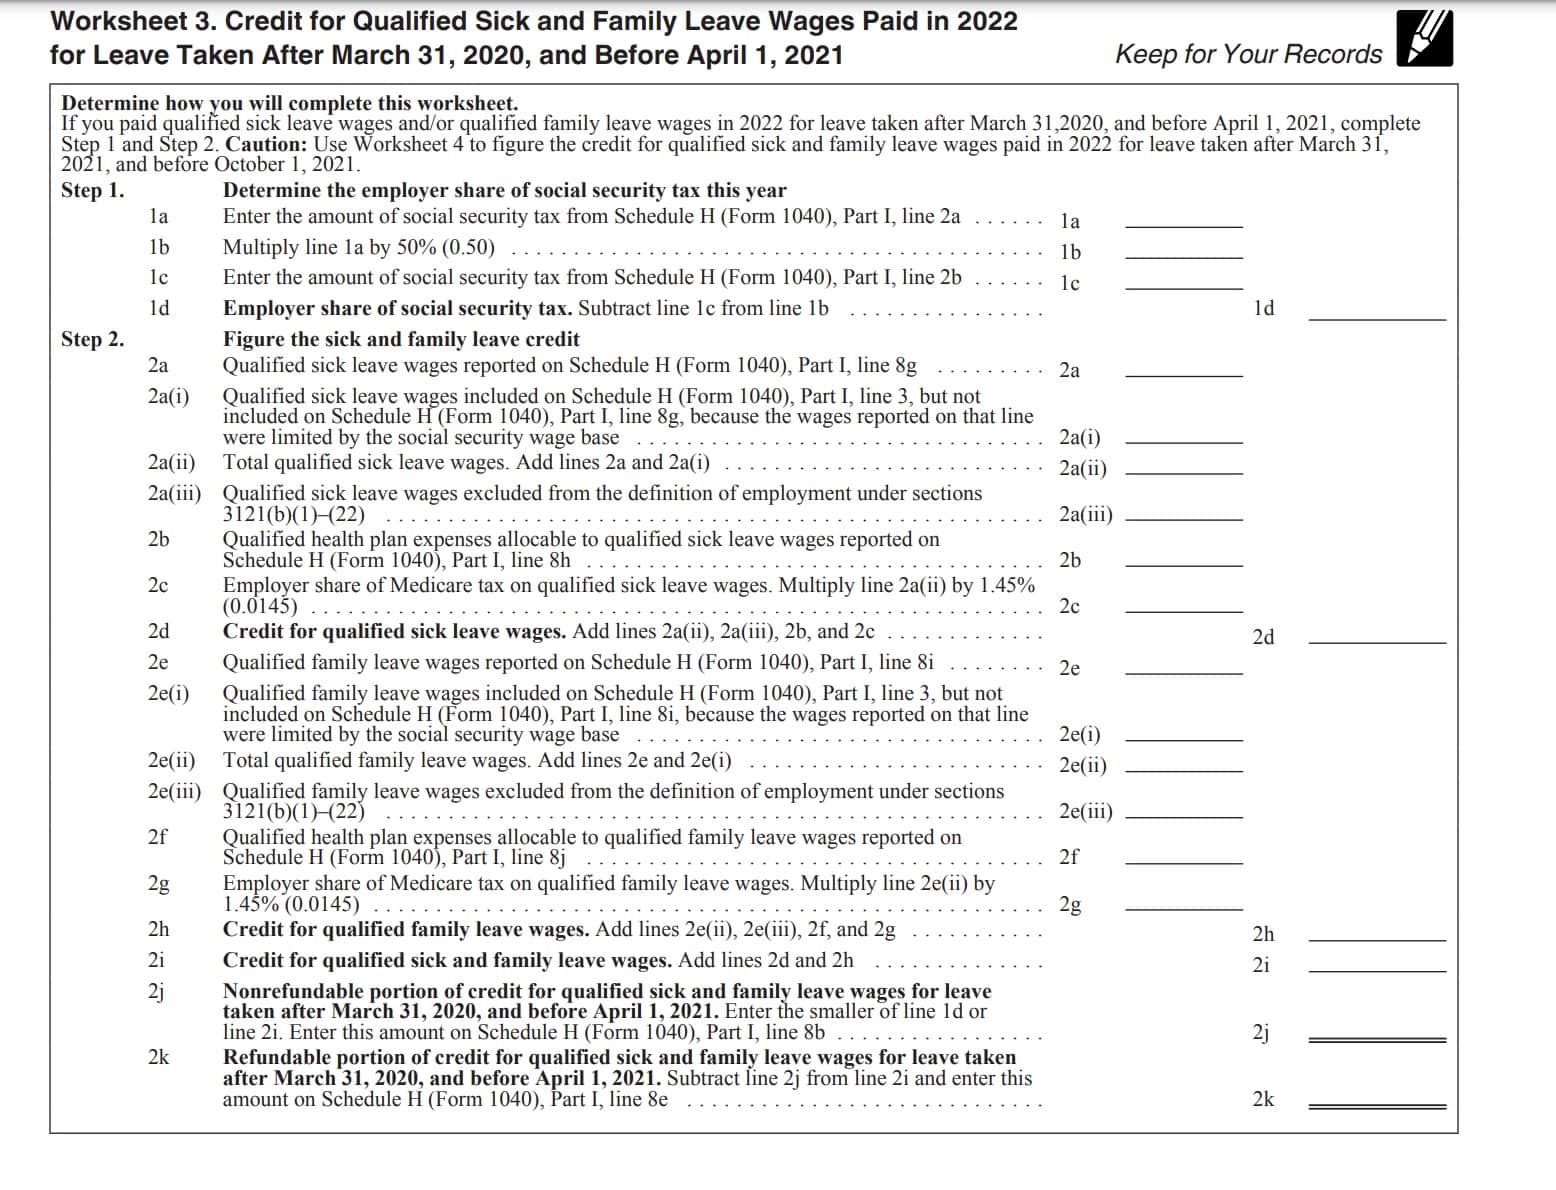 worksheet 3: credit for qualified sick and family leave wages paid on 2022 for leave taken after March 31, 2020, and before April 1, 2021